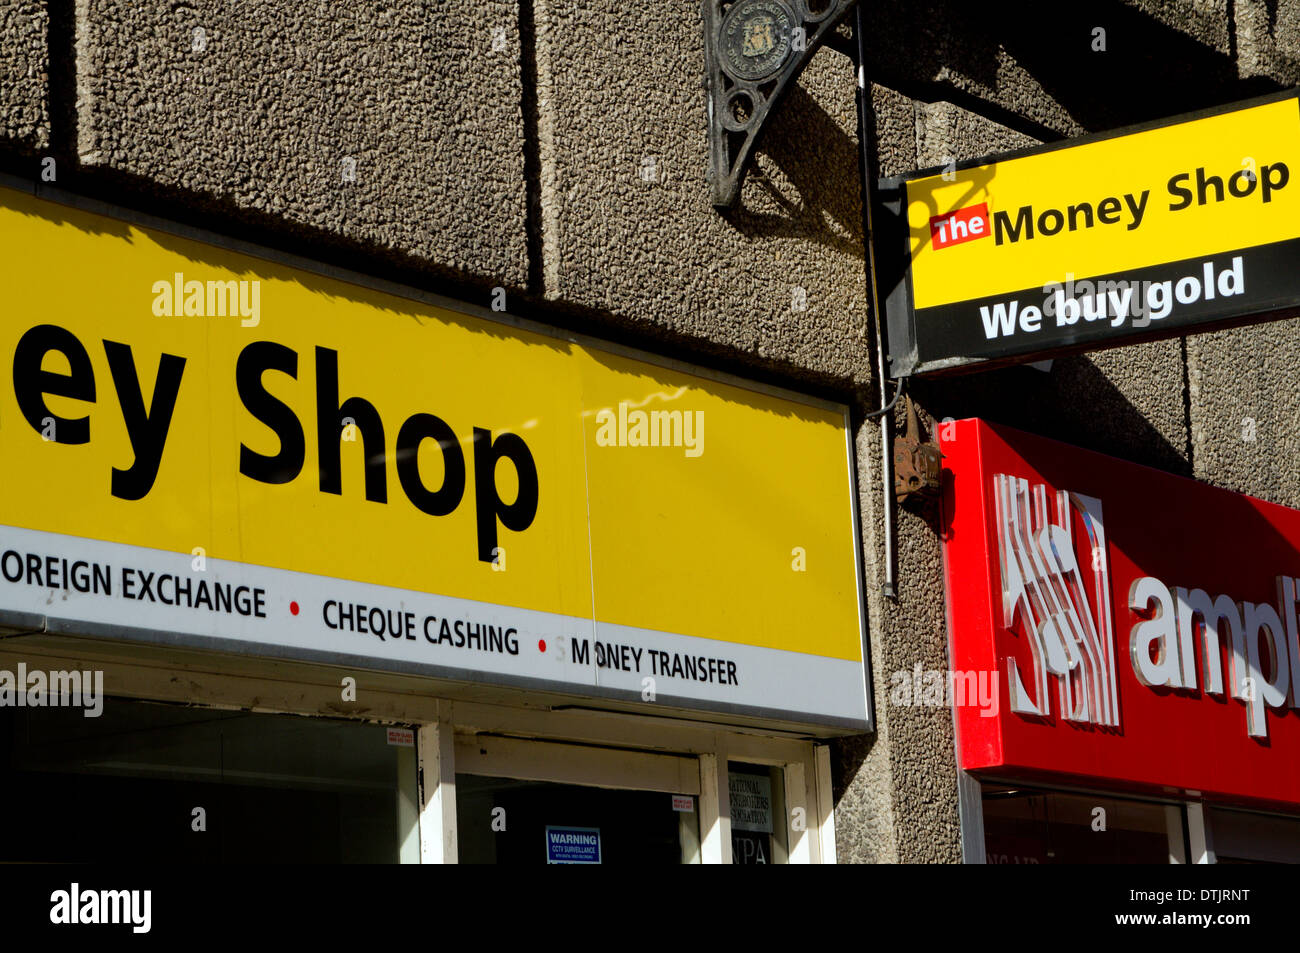 The Money Shop,  Cardiff, South Wales, UK. Stock Photo